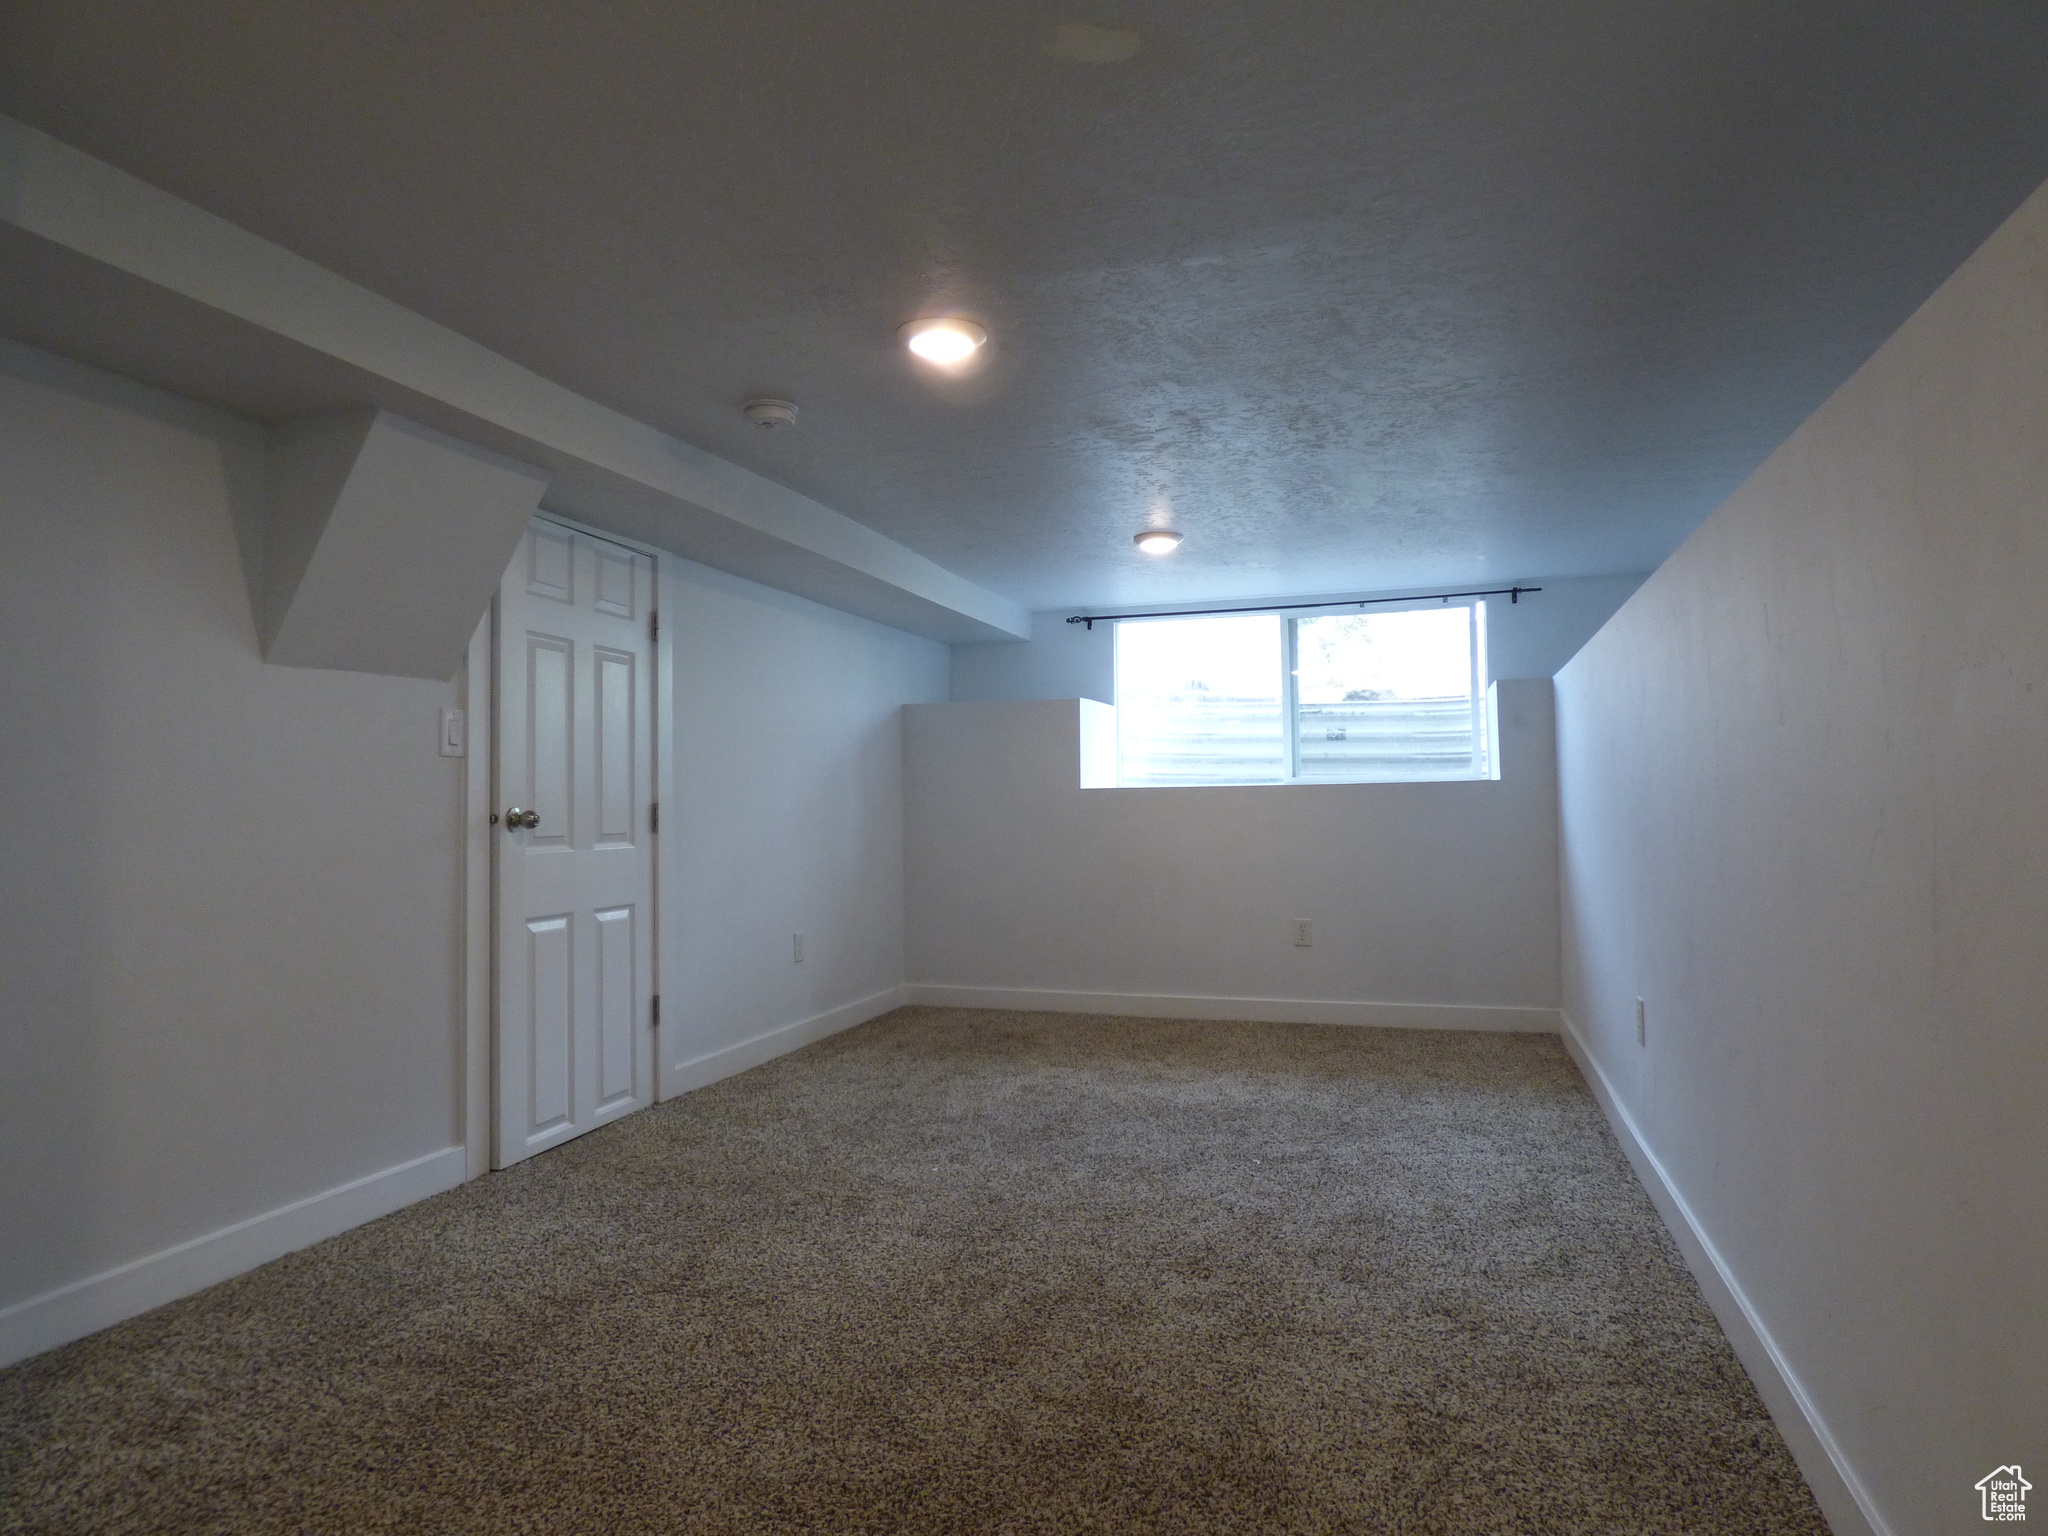 Bonus room with light carpet and a textured ceiling